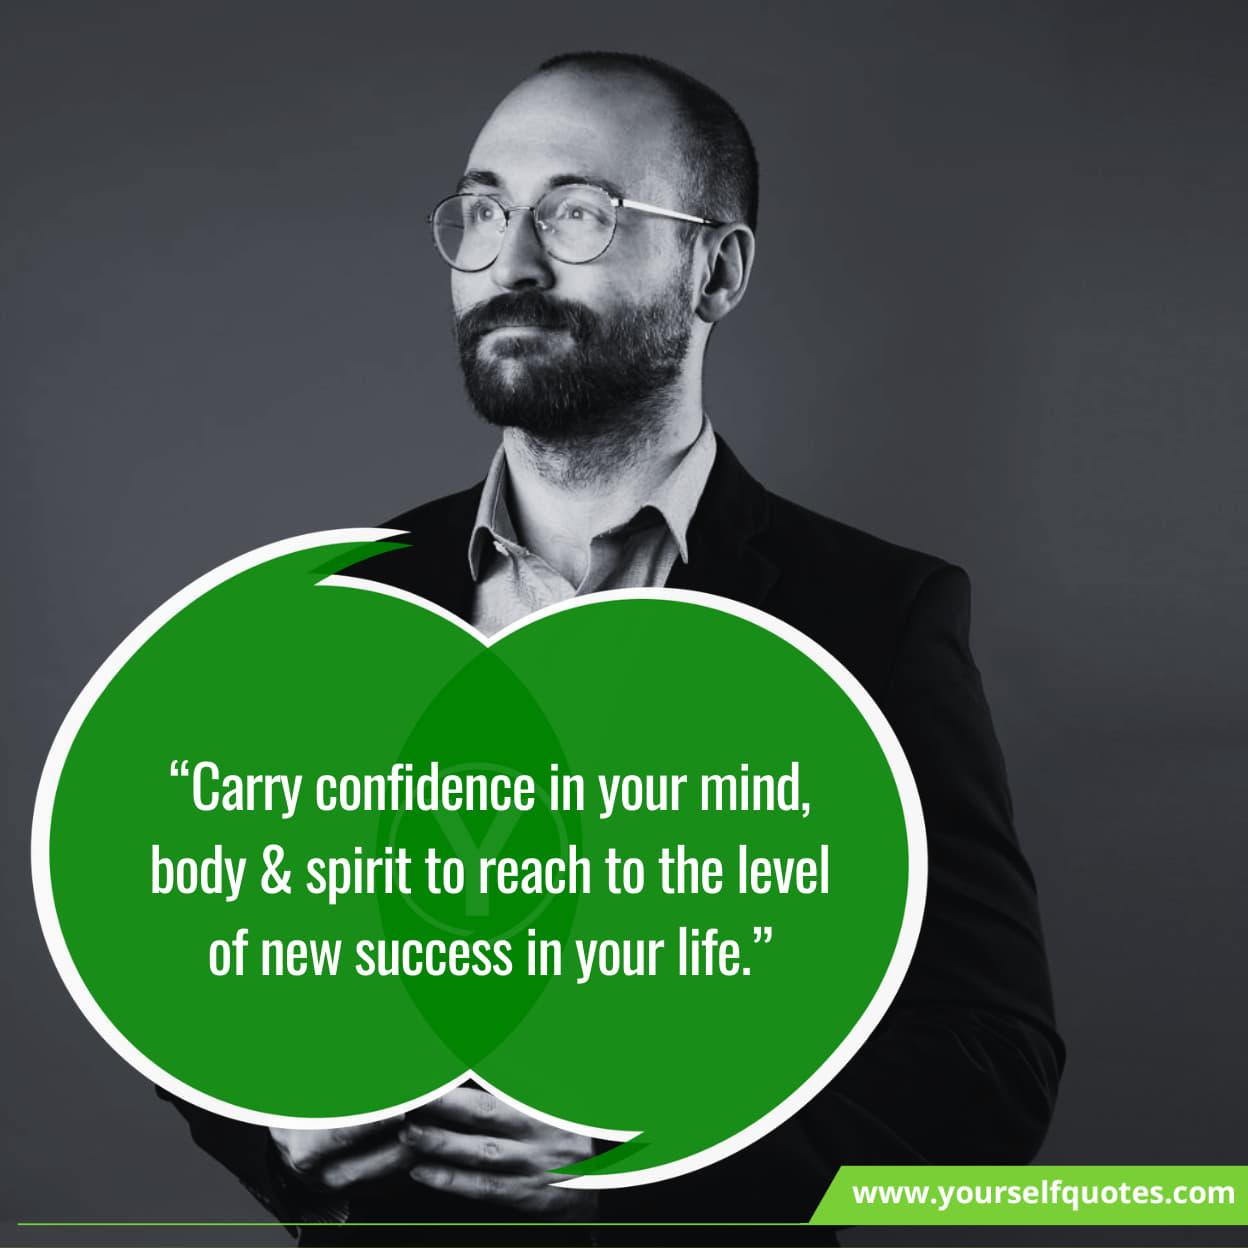 Self-Confidence Quotes For Success